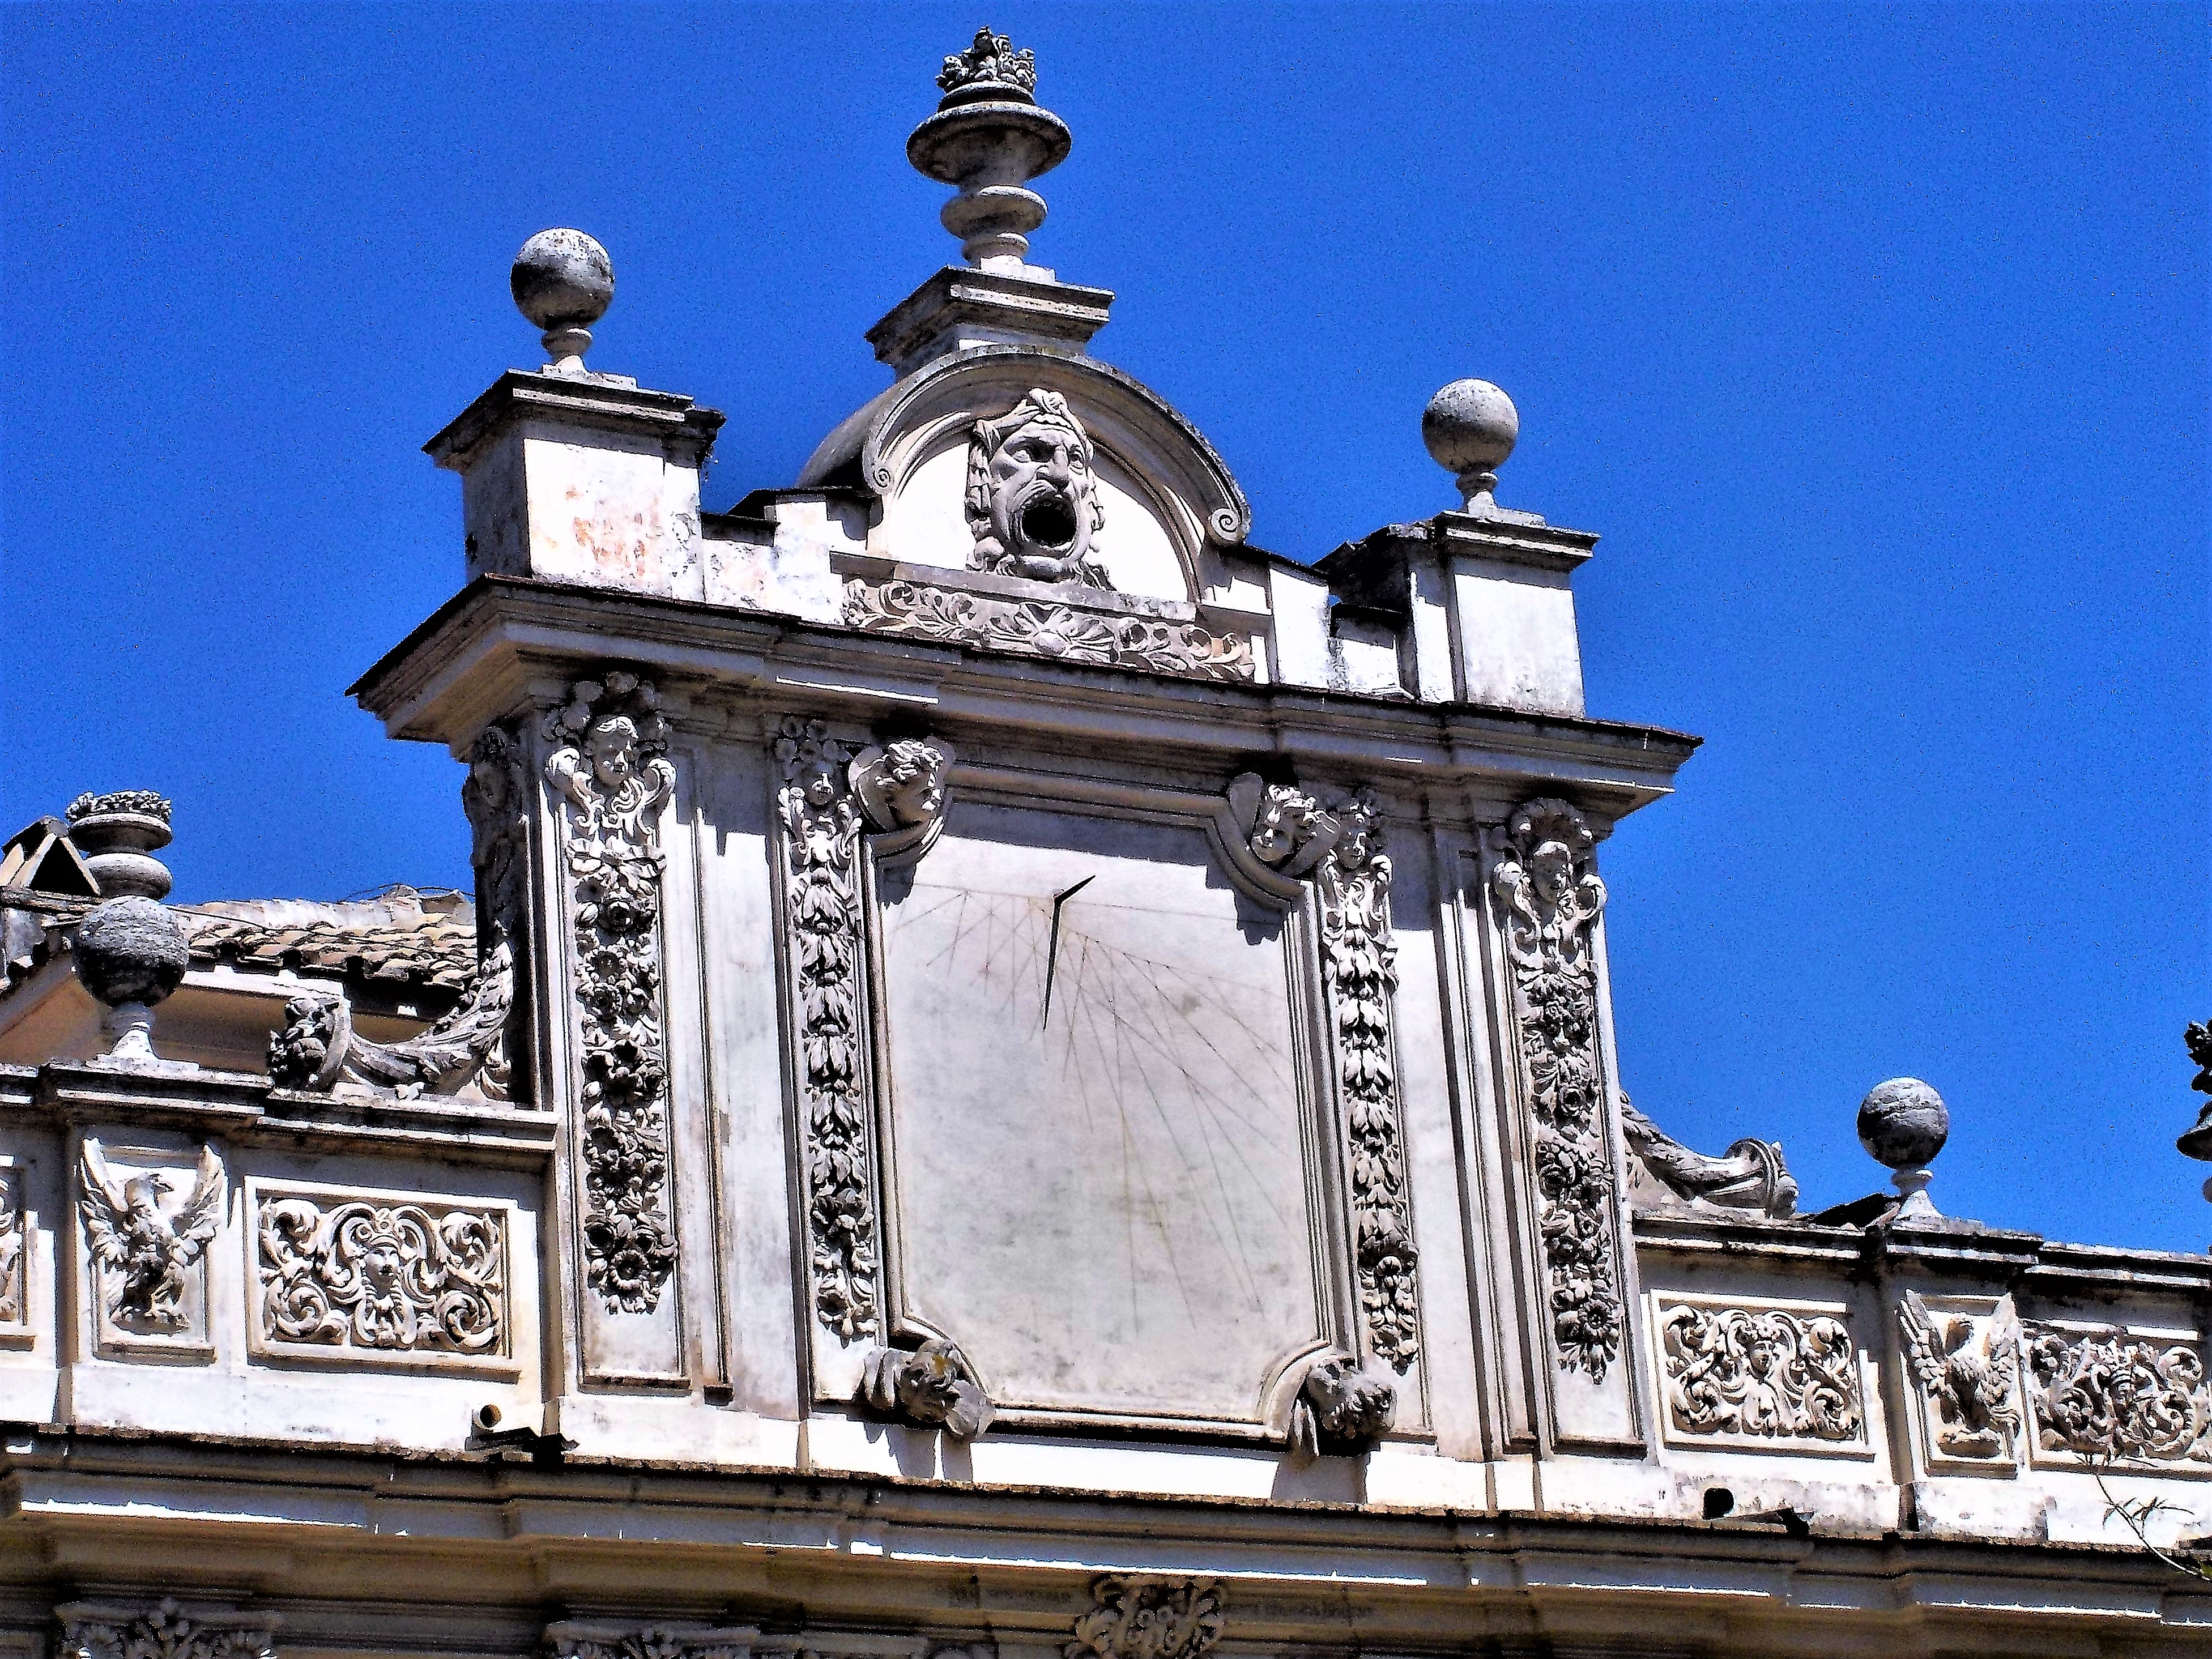 File:Secret Gardens of Villa Borghese, the sundial with the four winds. Rome.jpg - Wikimedia Commons